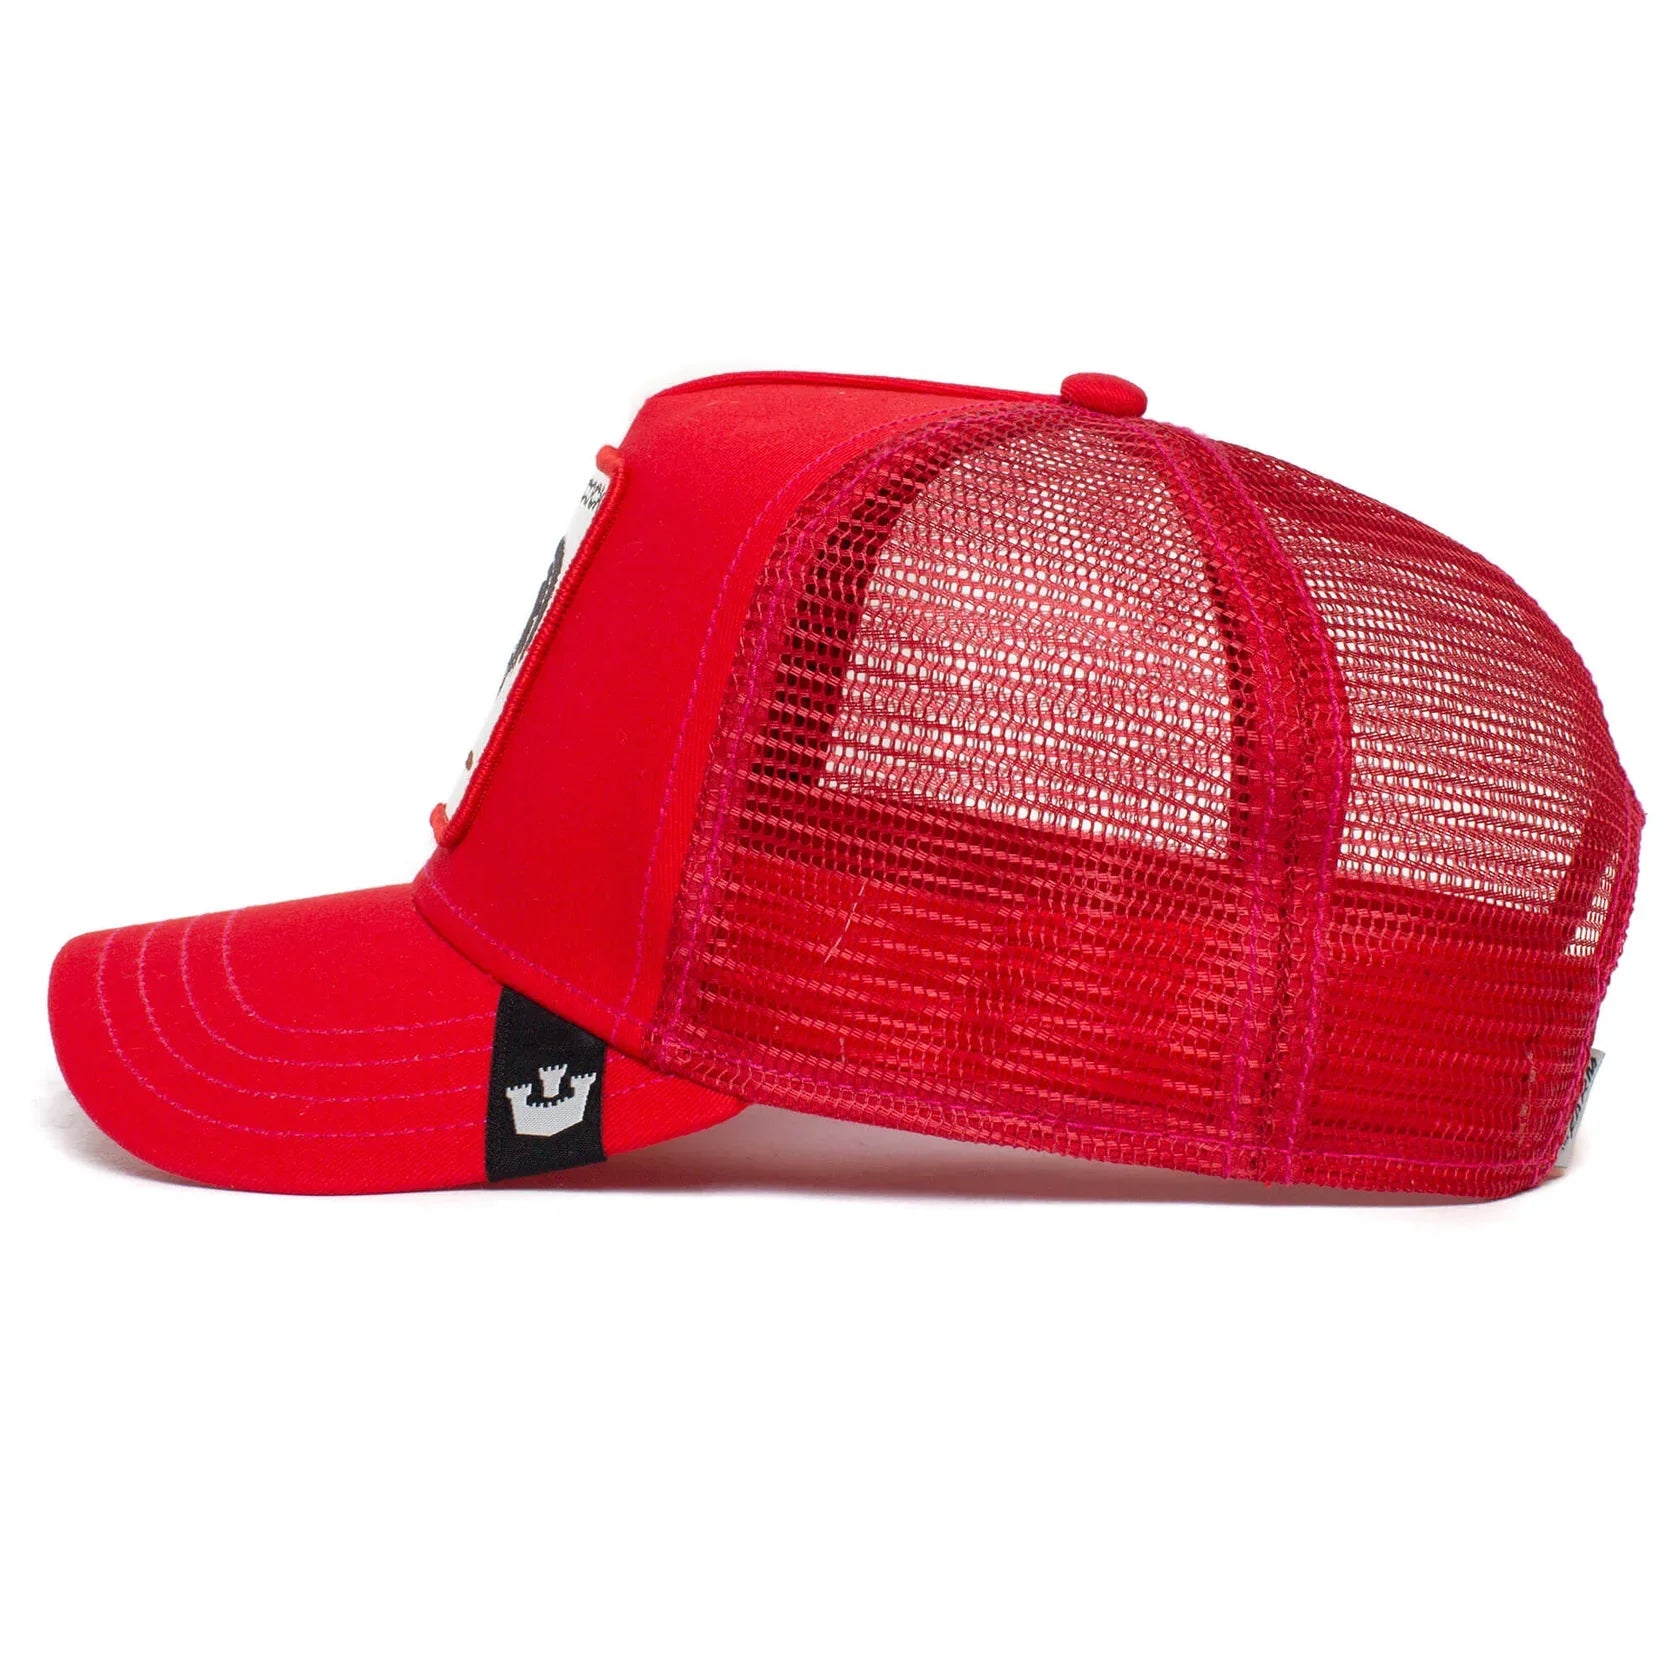 'Goorin Bros. The Cock Trucker Hat' in 'Red' colour